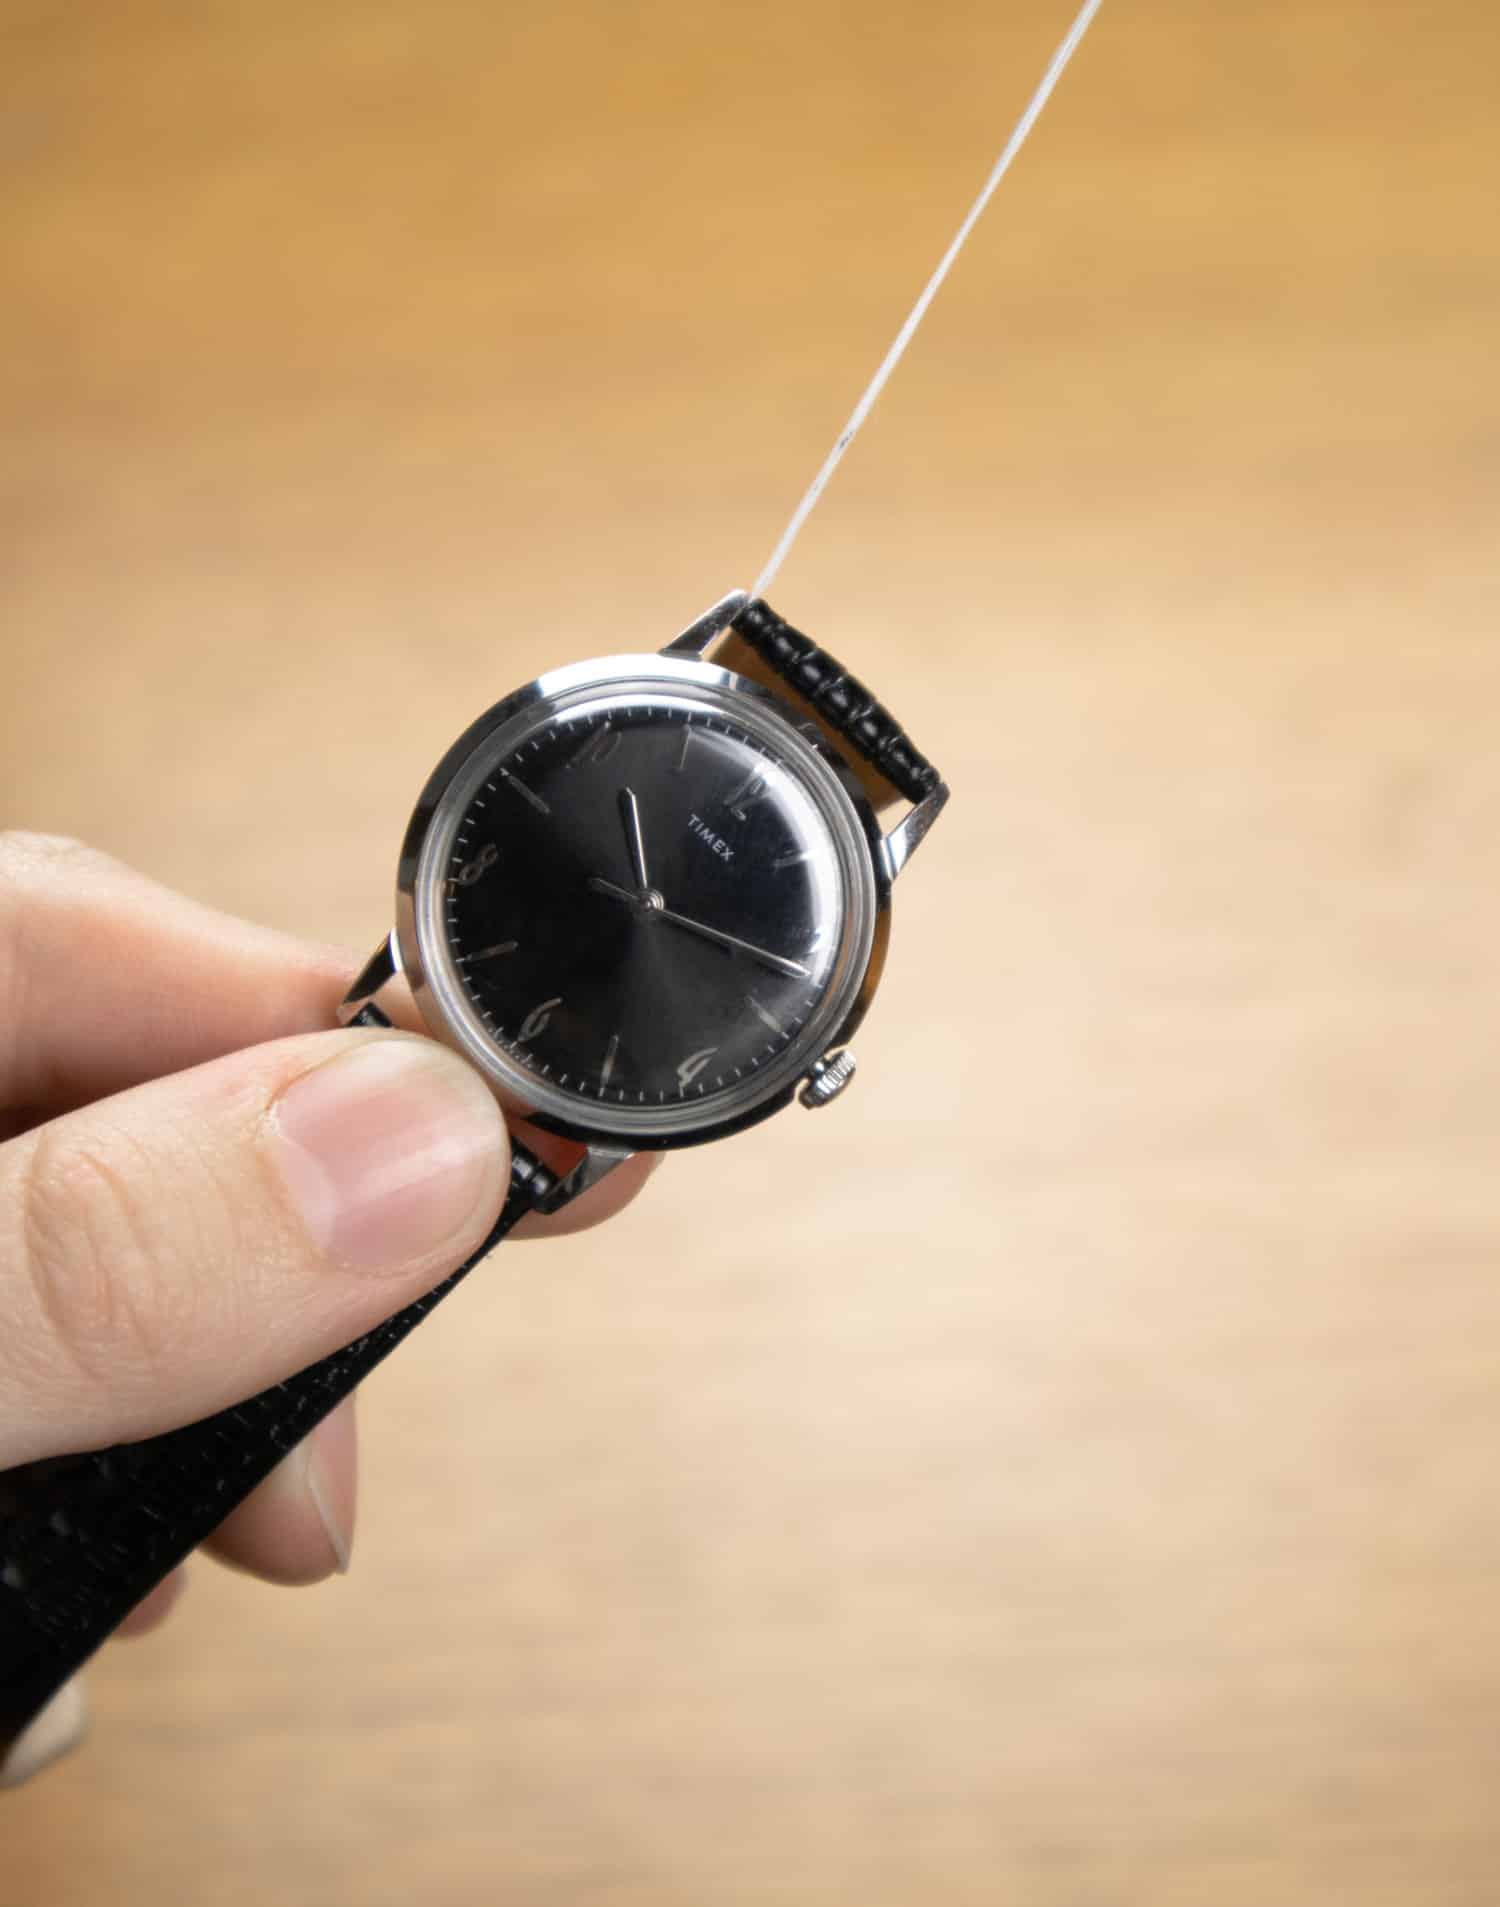 How to Change Watch Straps With Dental Floss-4